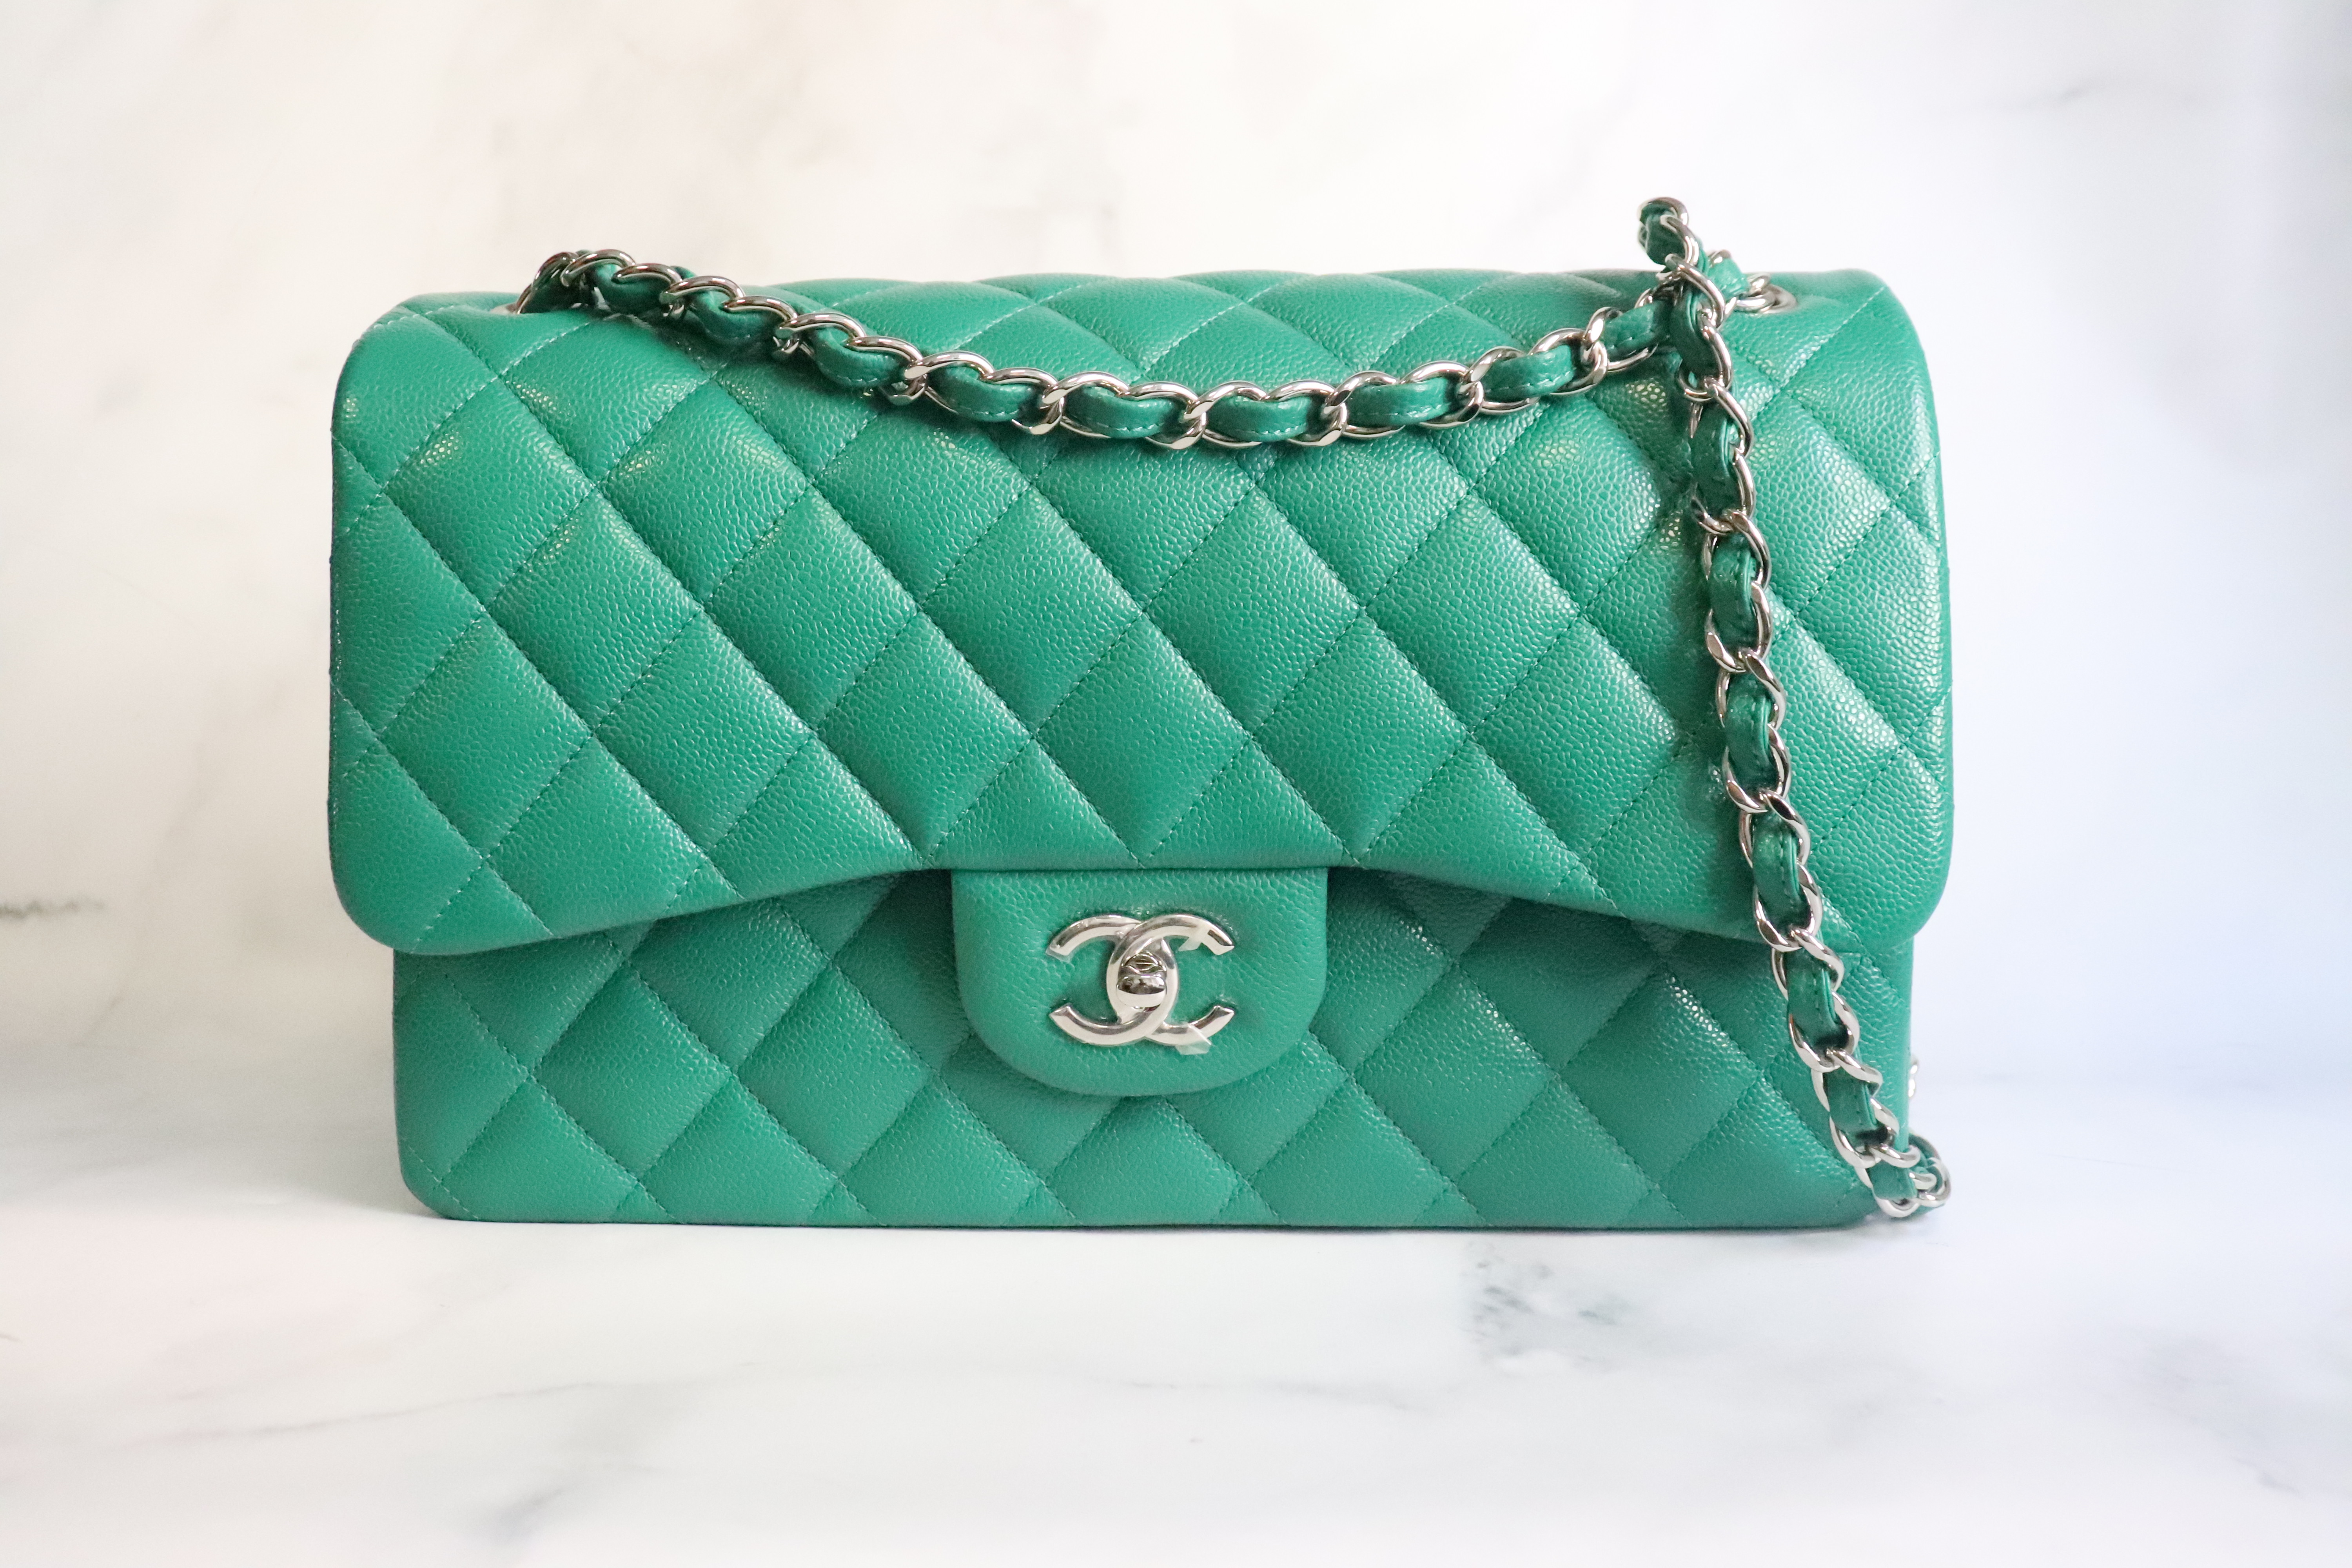 Chanel Classic Jumbo Double Flap, Green Caviar Leather, Silver Hardware,  Preowned in Box (No Dustbag)